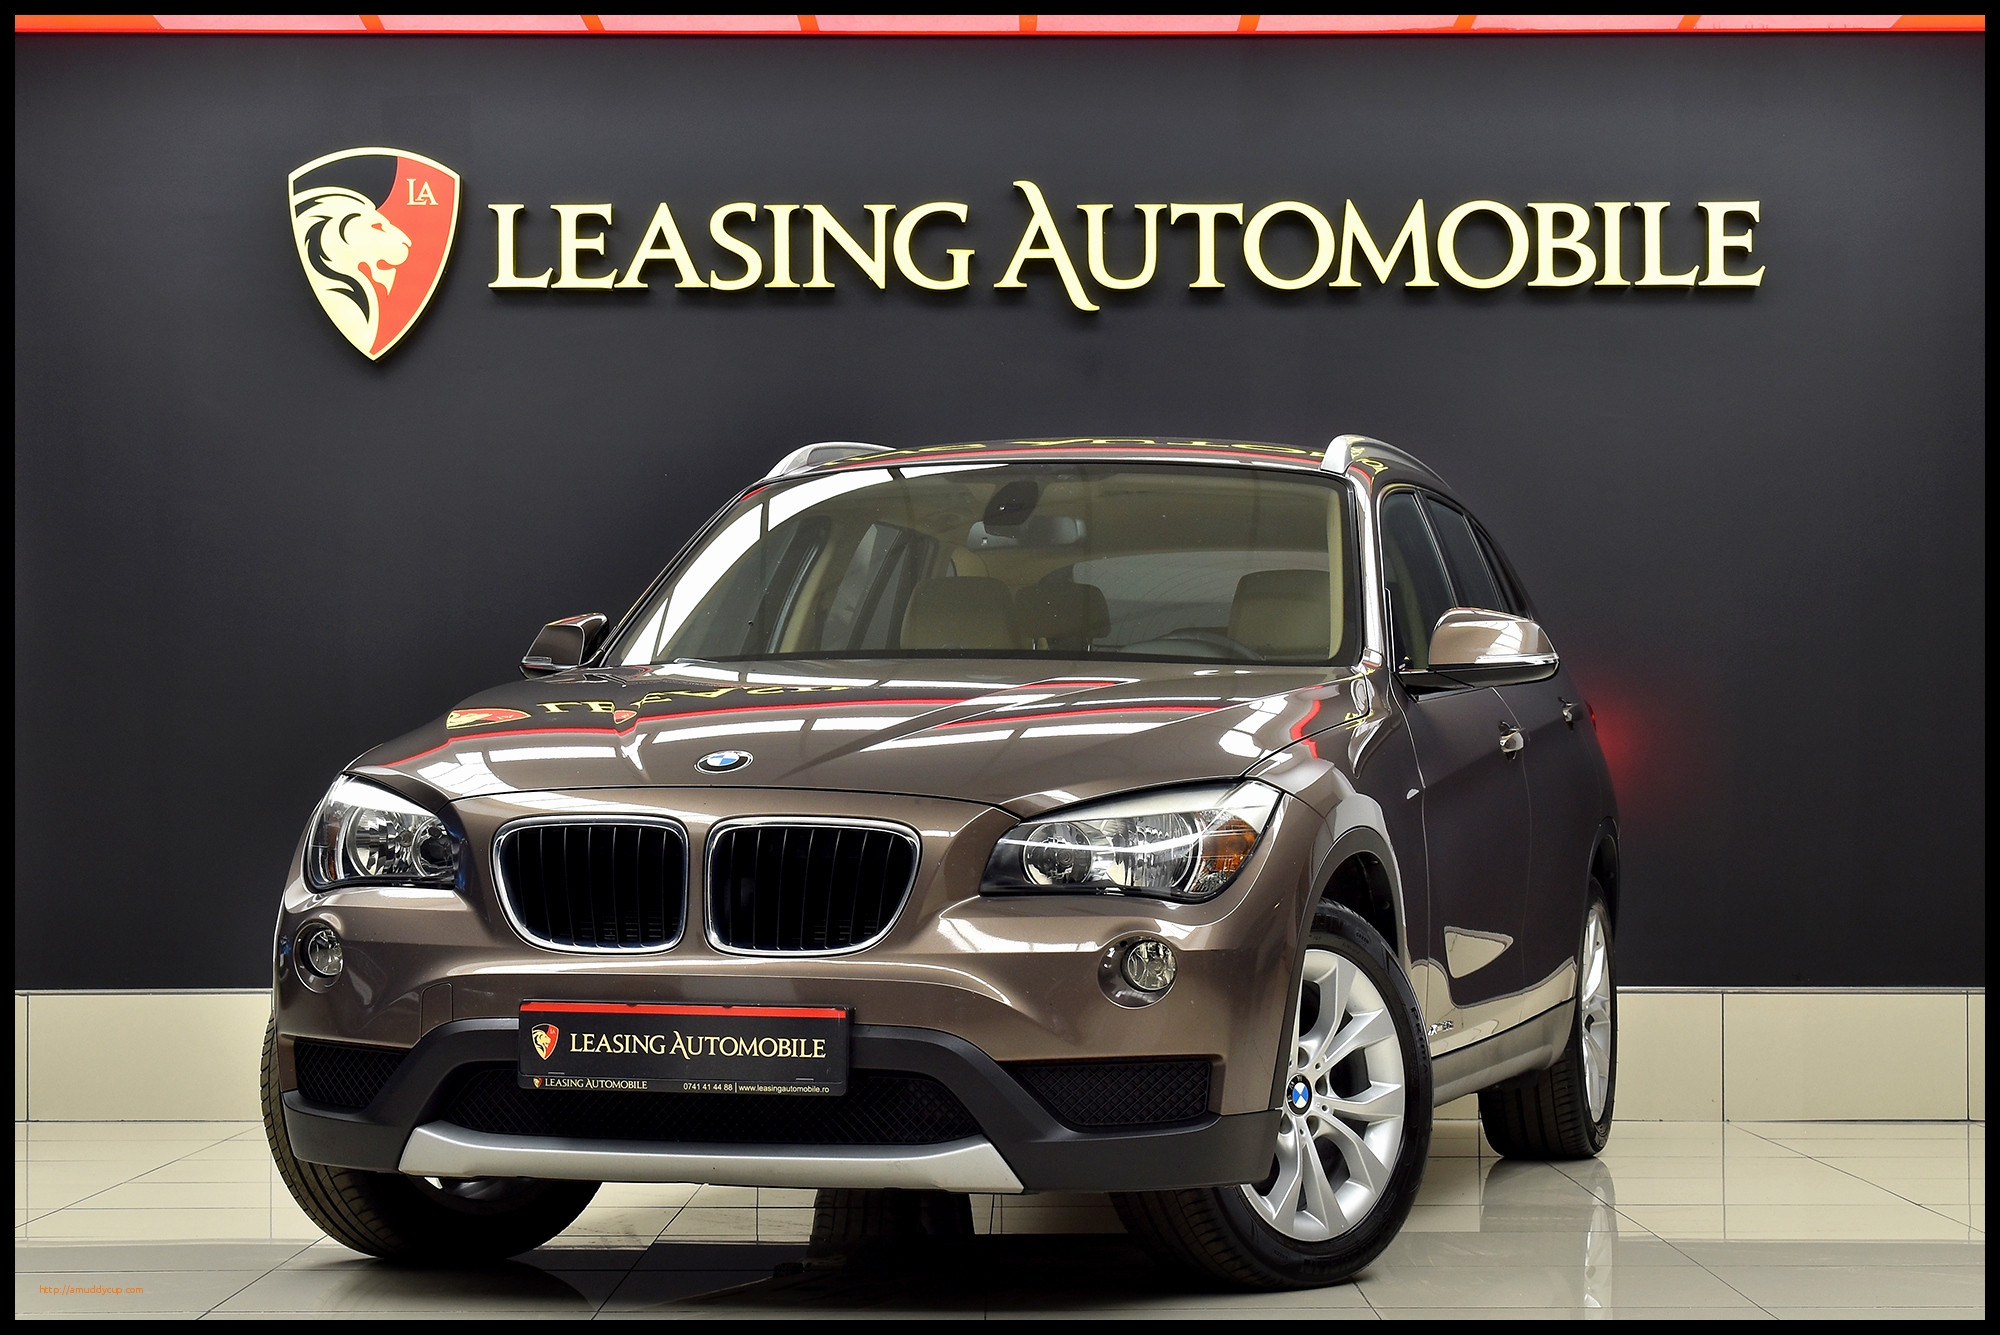 2018 Bmw I3 Lease Edmunds Lovely Lease Bmw X1 Beautiful Auto Rulate Bmw X1 2 0d